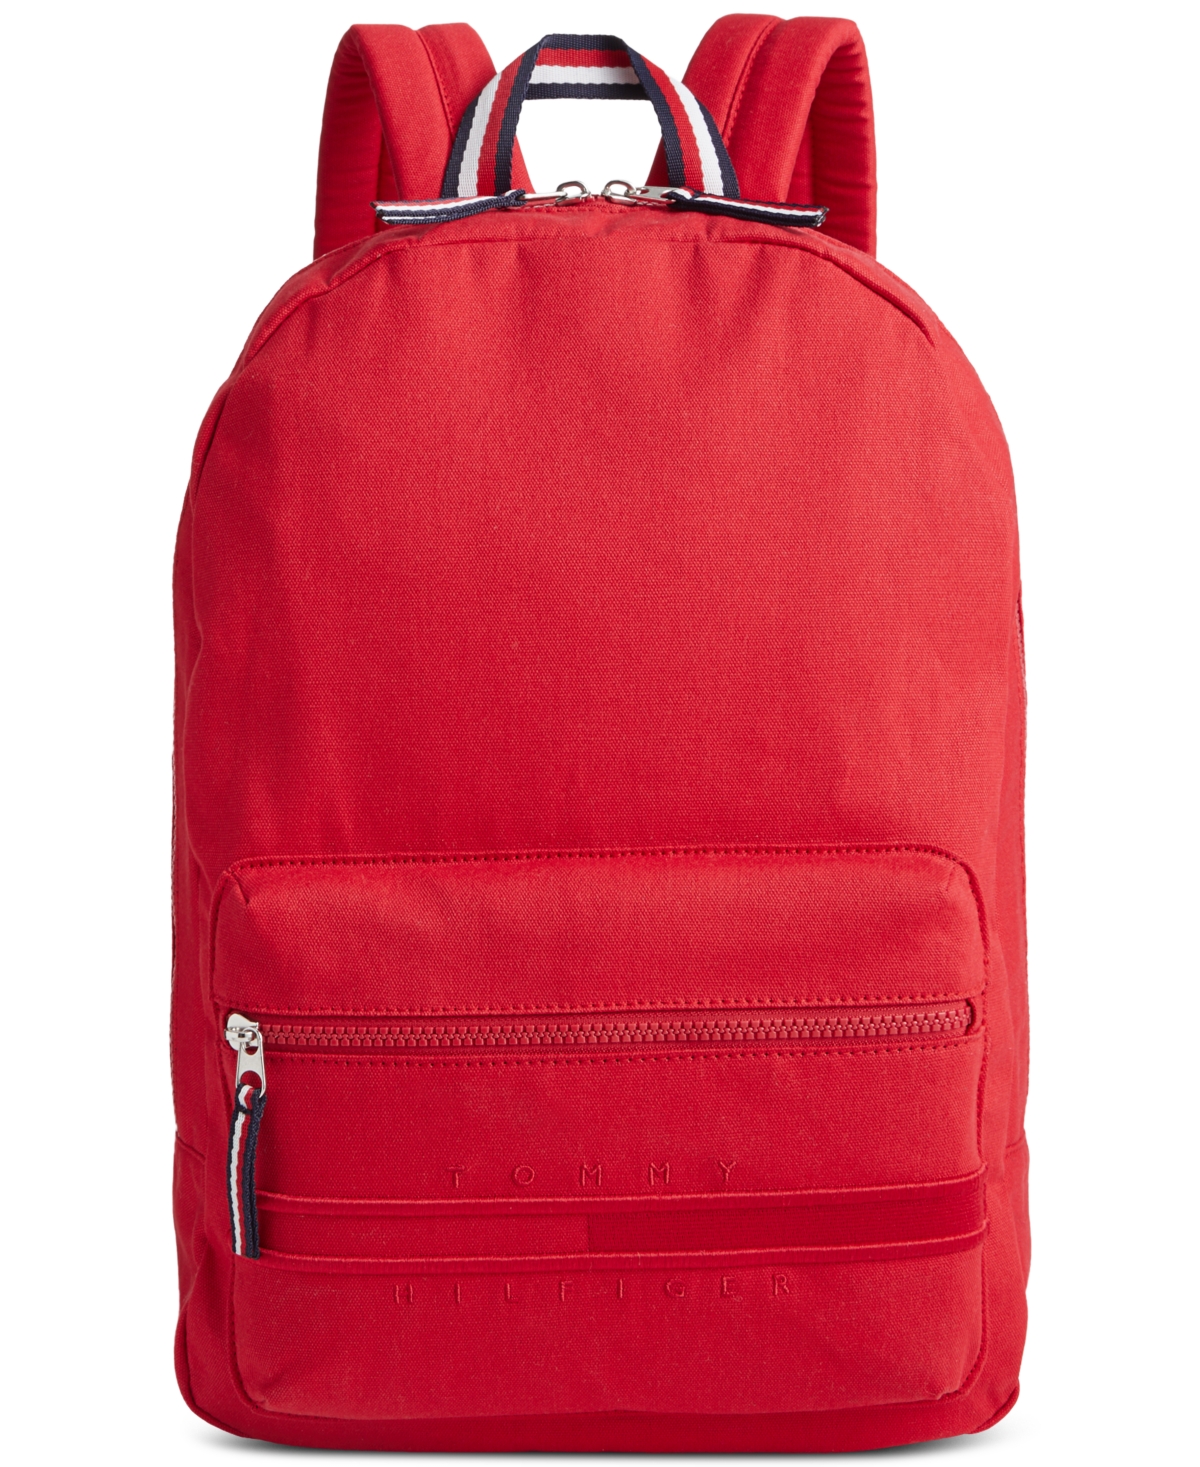 Tommy Hilfiger Men's Gino Monochrome Backpack In Apple Red